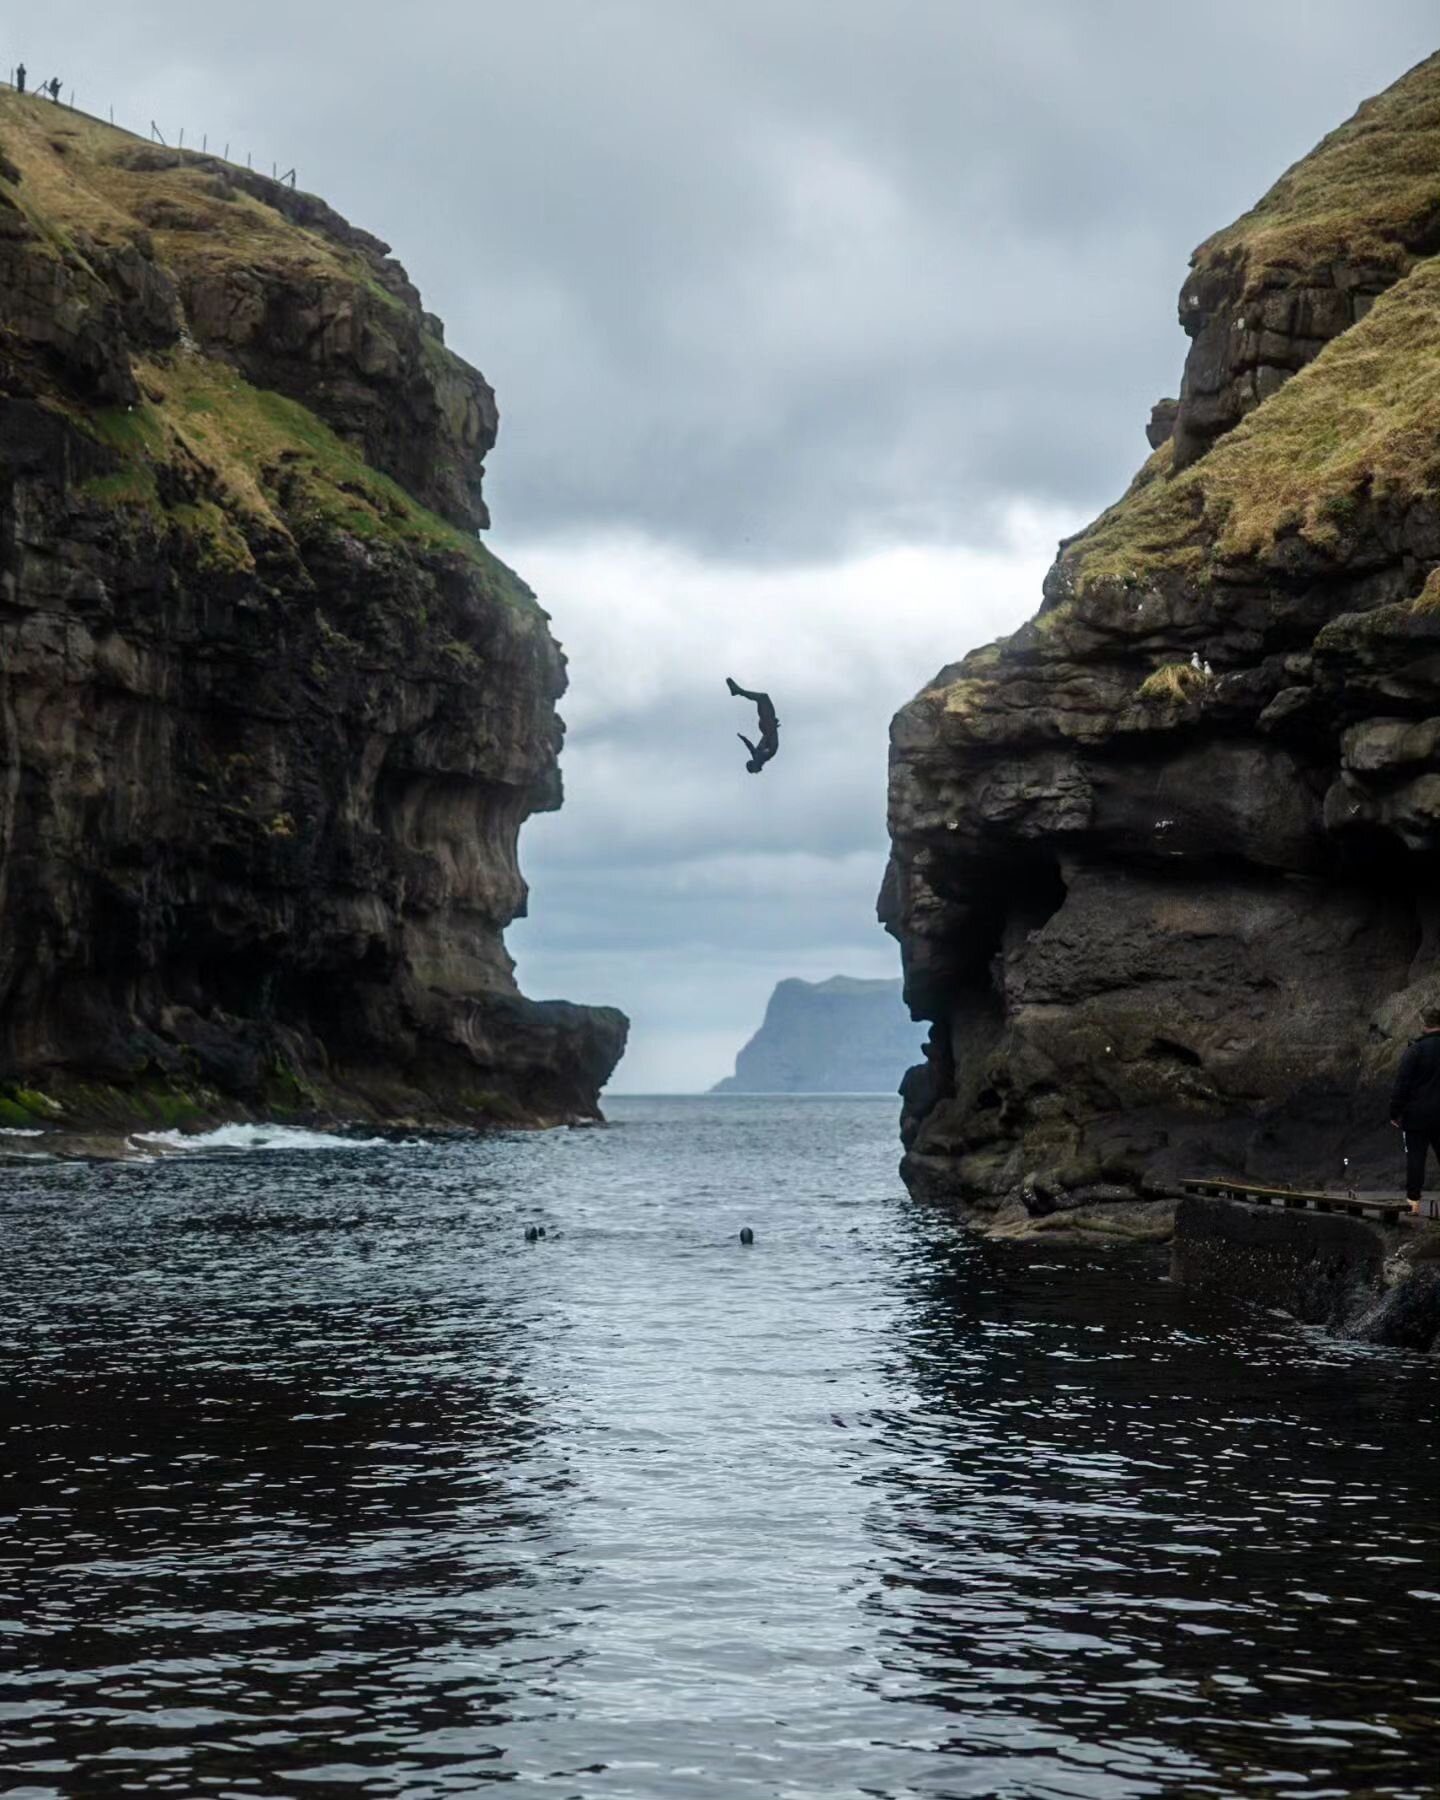 Cliff jumping and rappelling in the gorge in Gj&oacute;gv 🙌